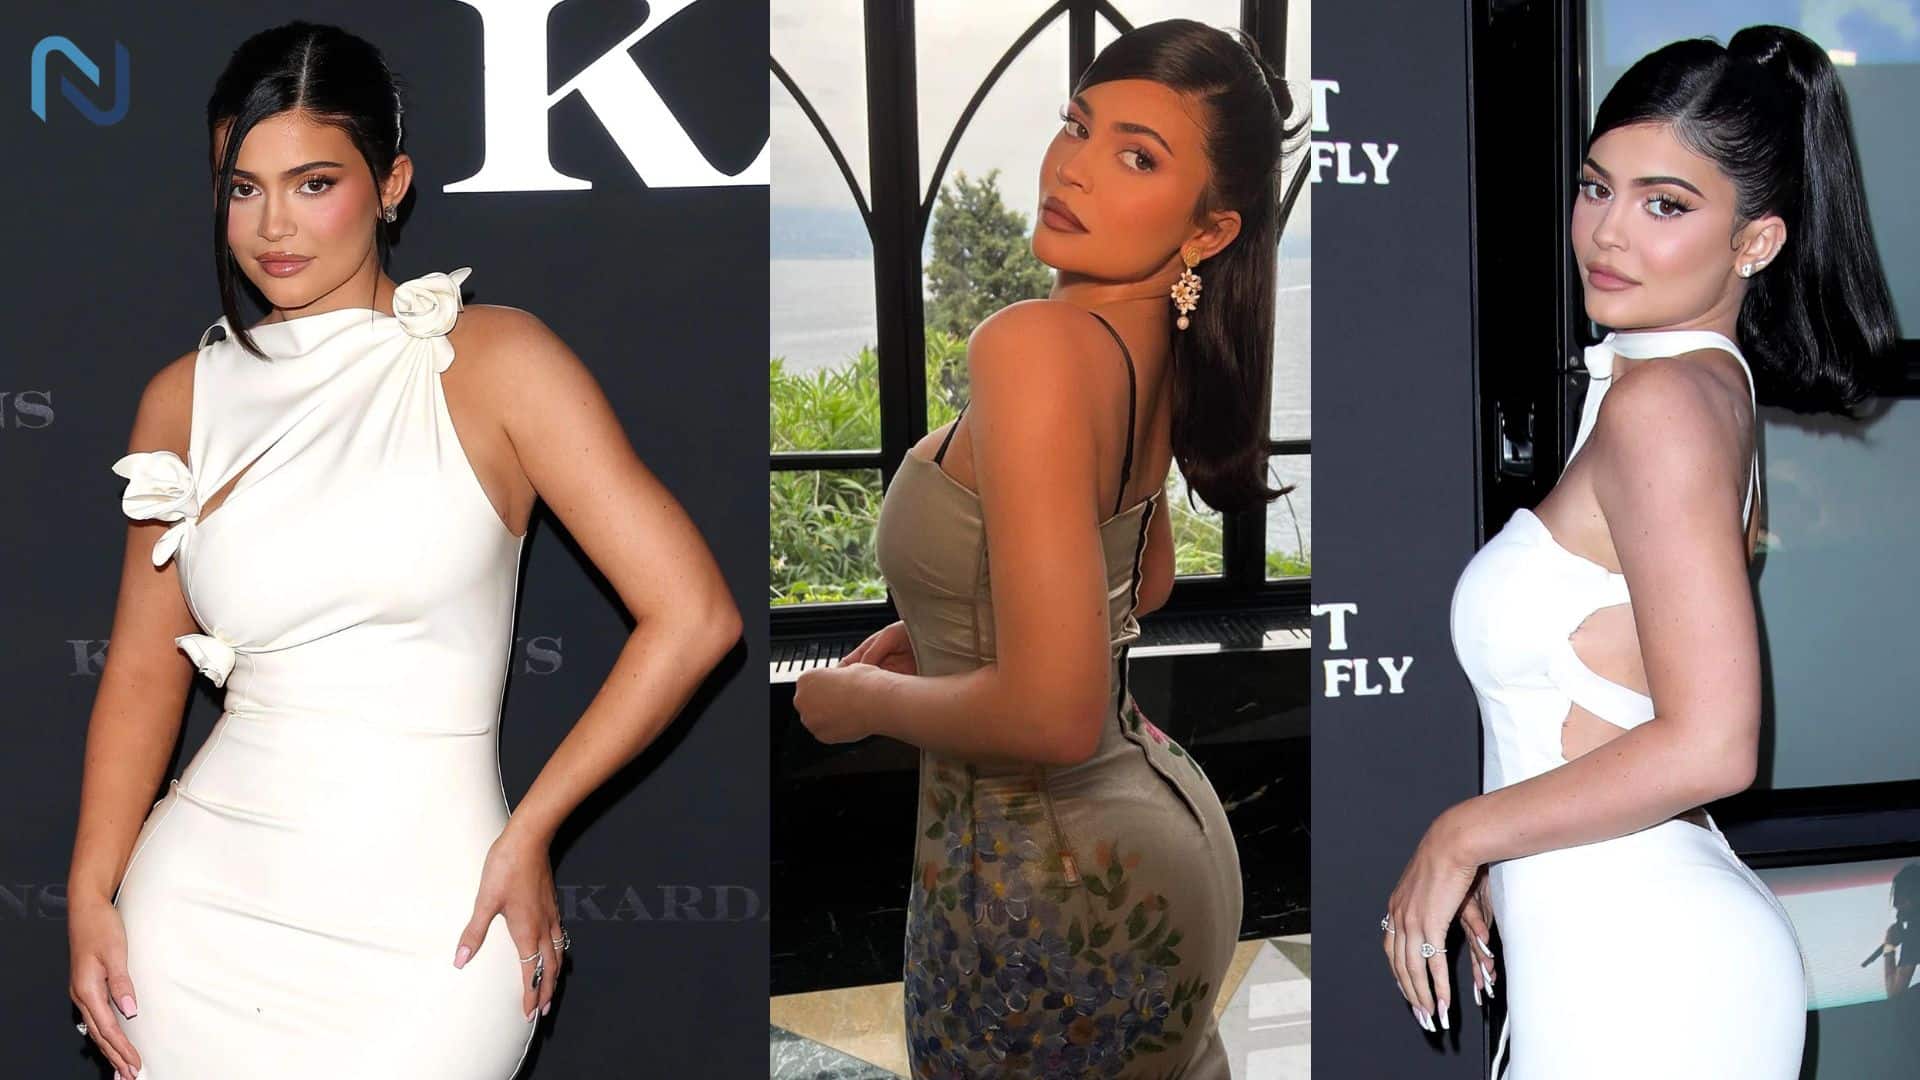 Kylie Jenner Sexiest Models in the World